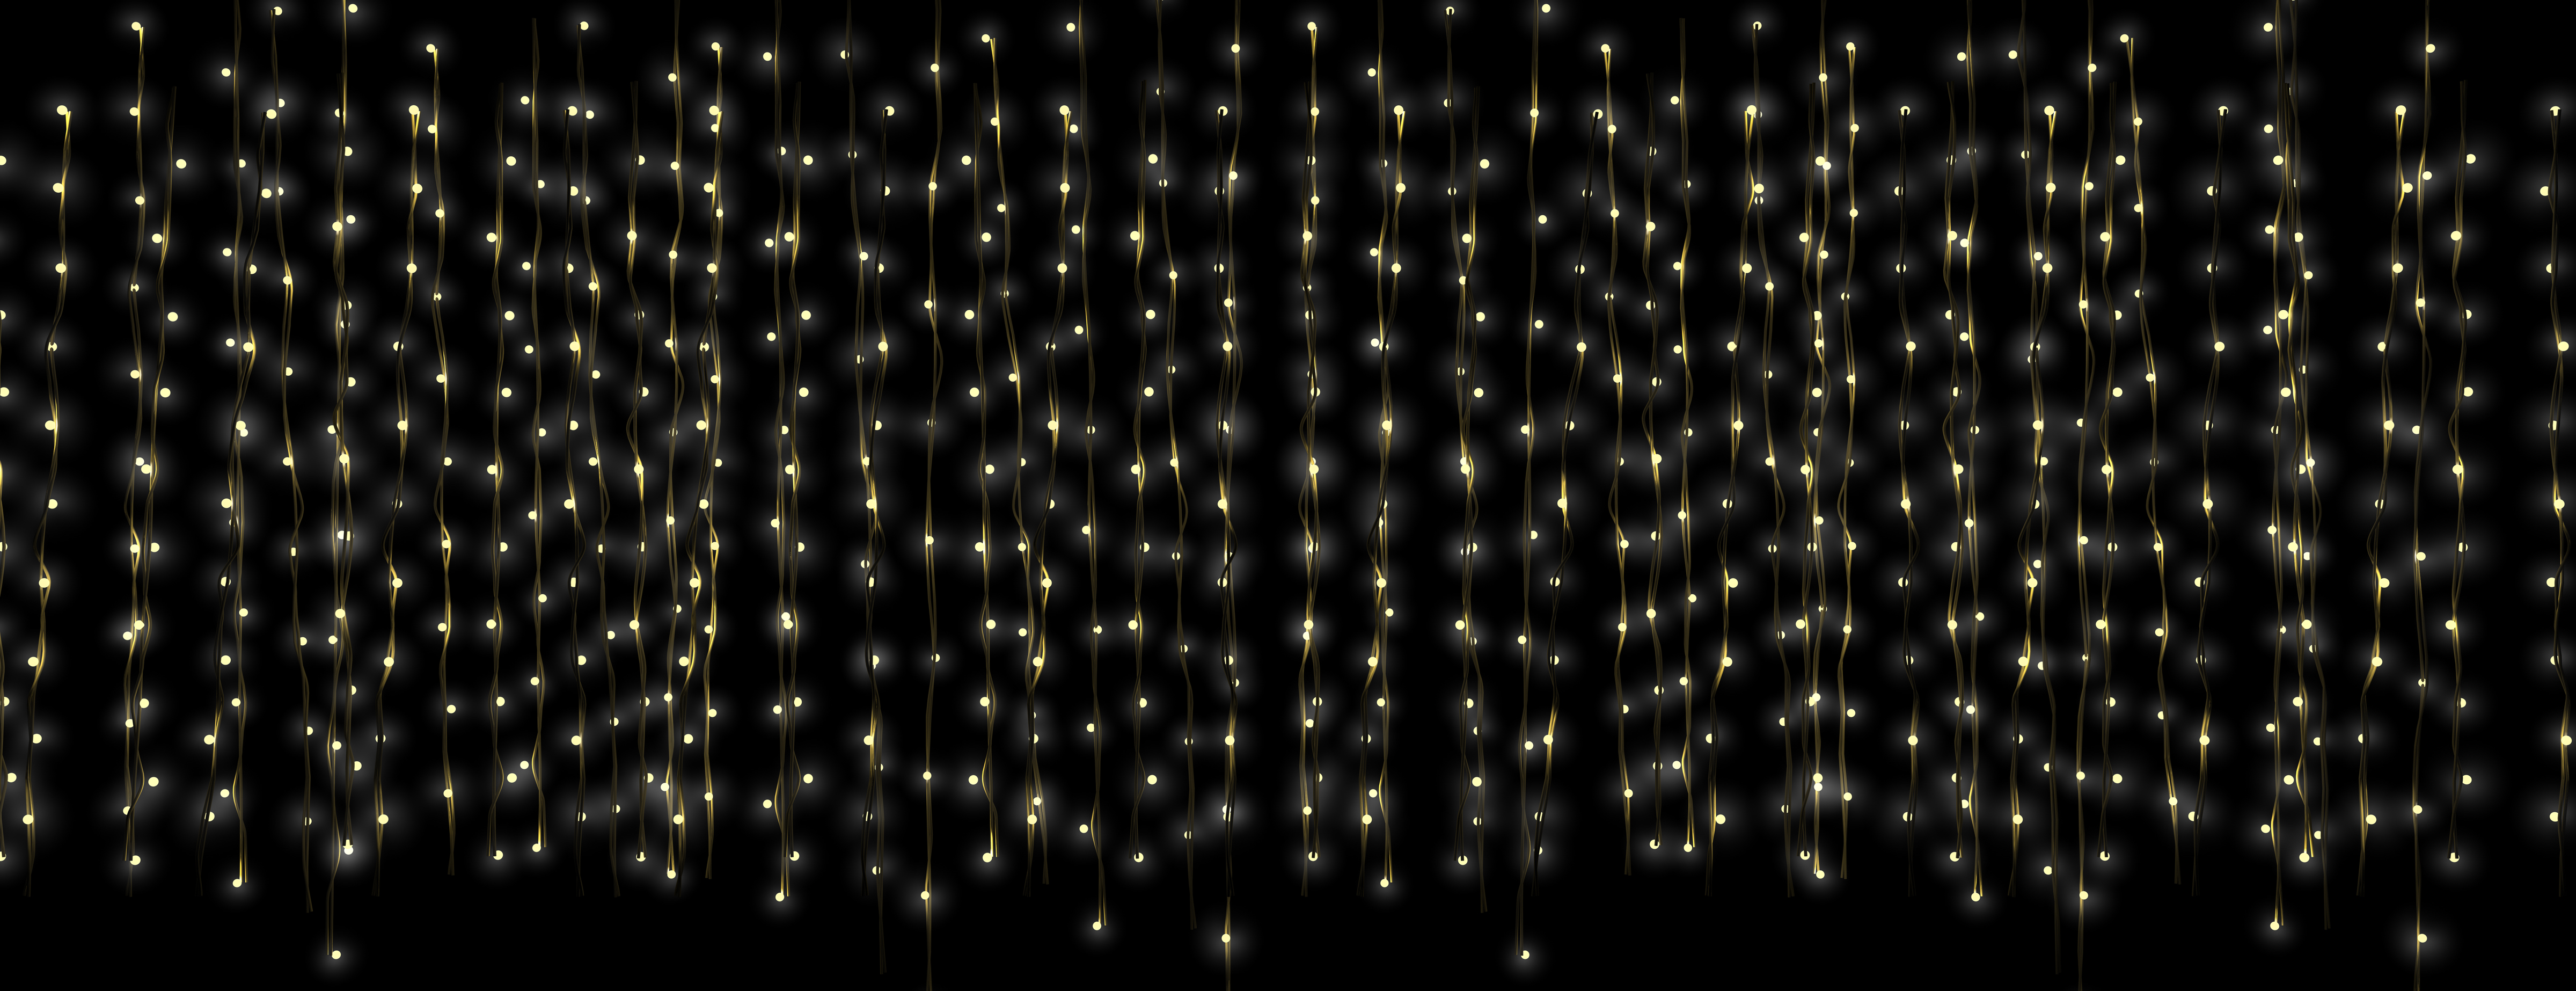 A curtain of string fairy lights on a dark background.